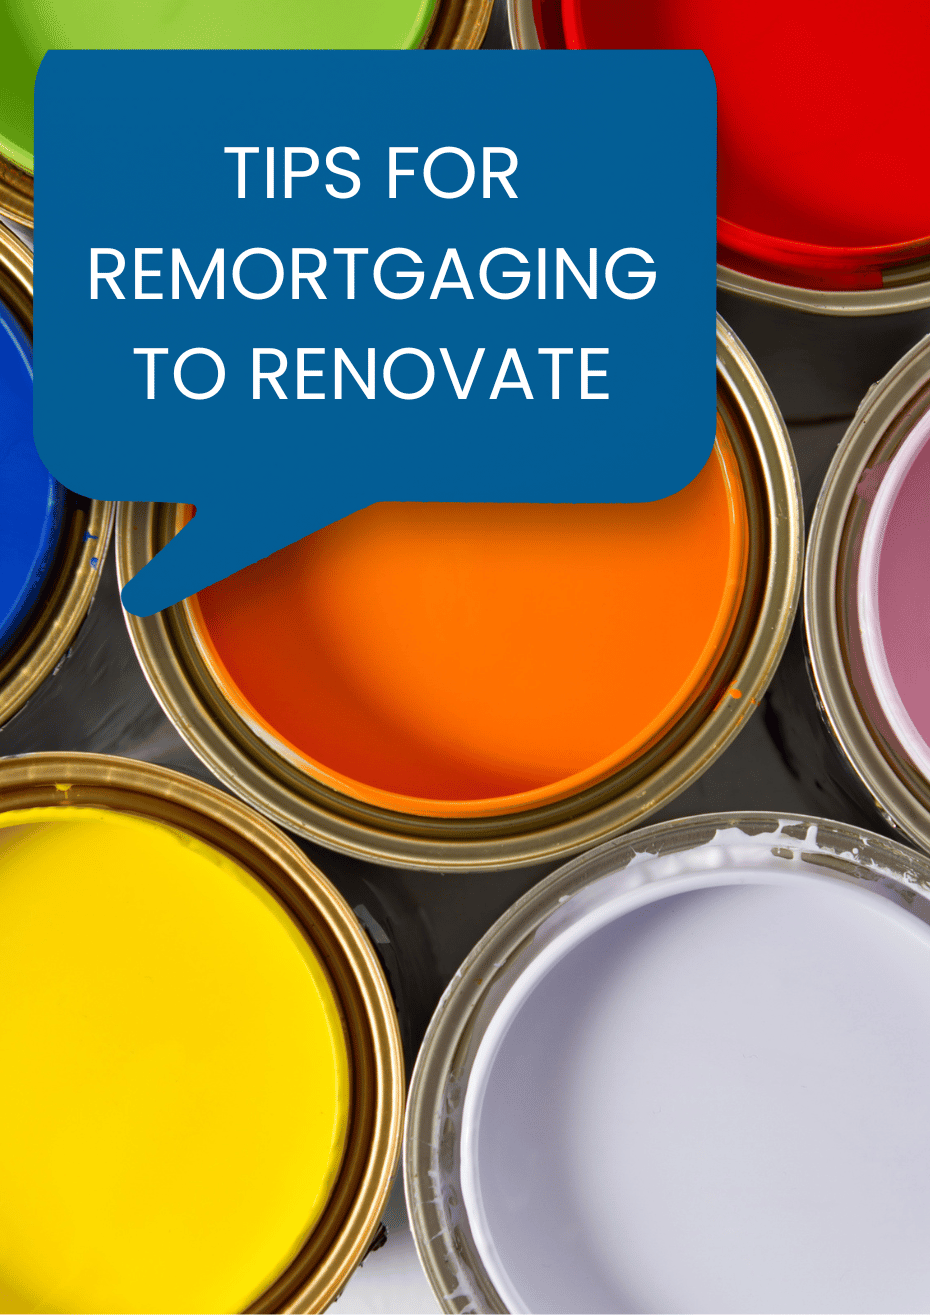 Tips for remortgaging to renovate